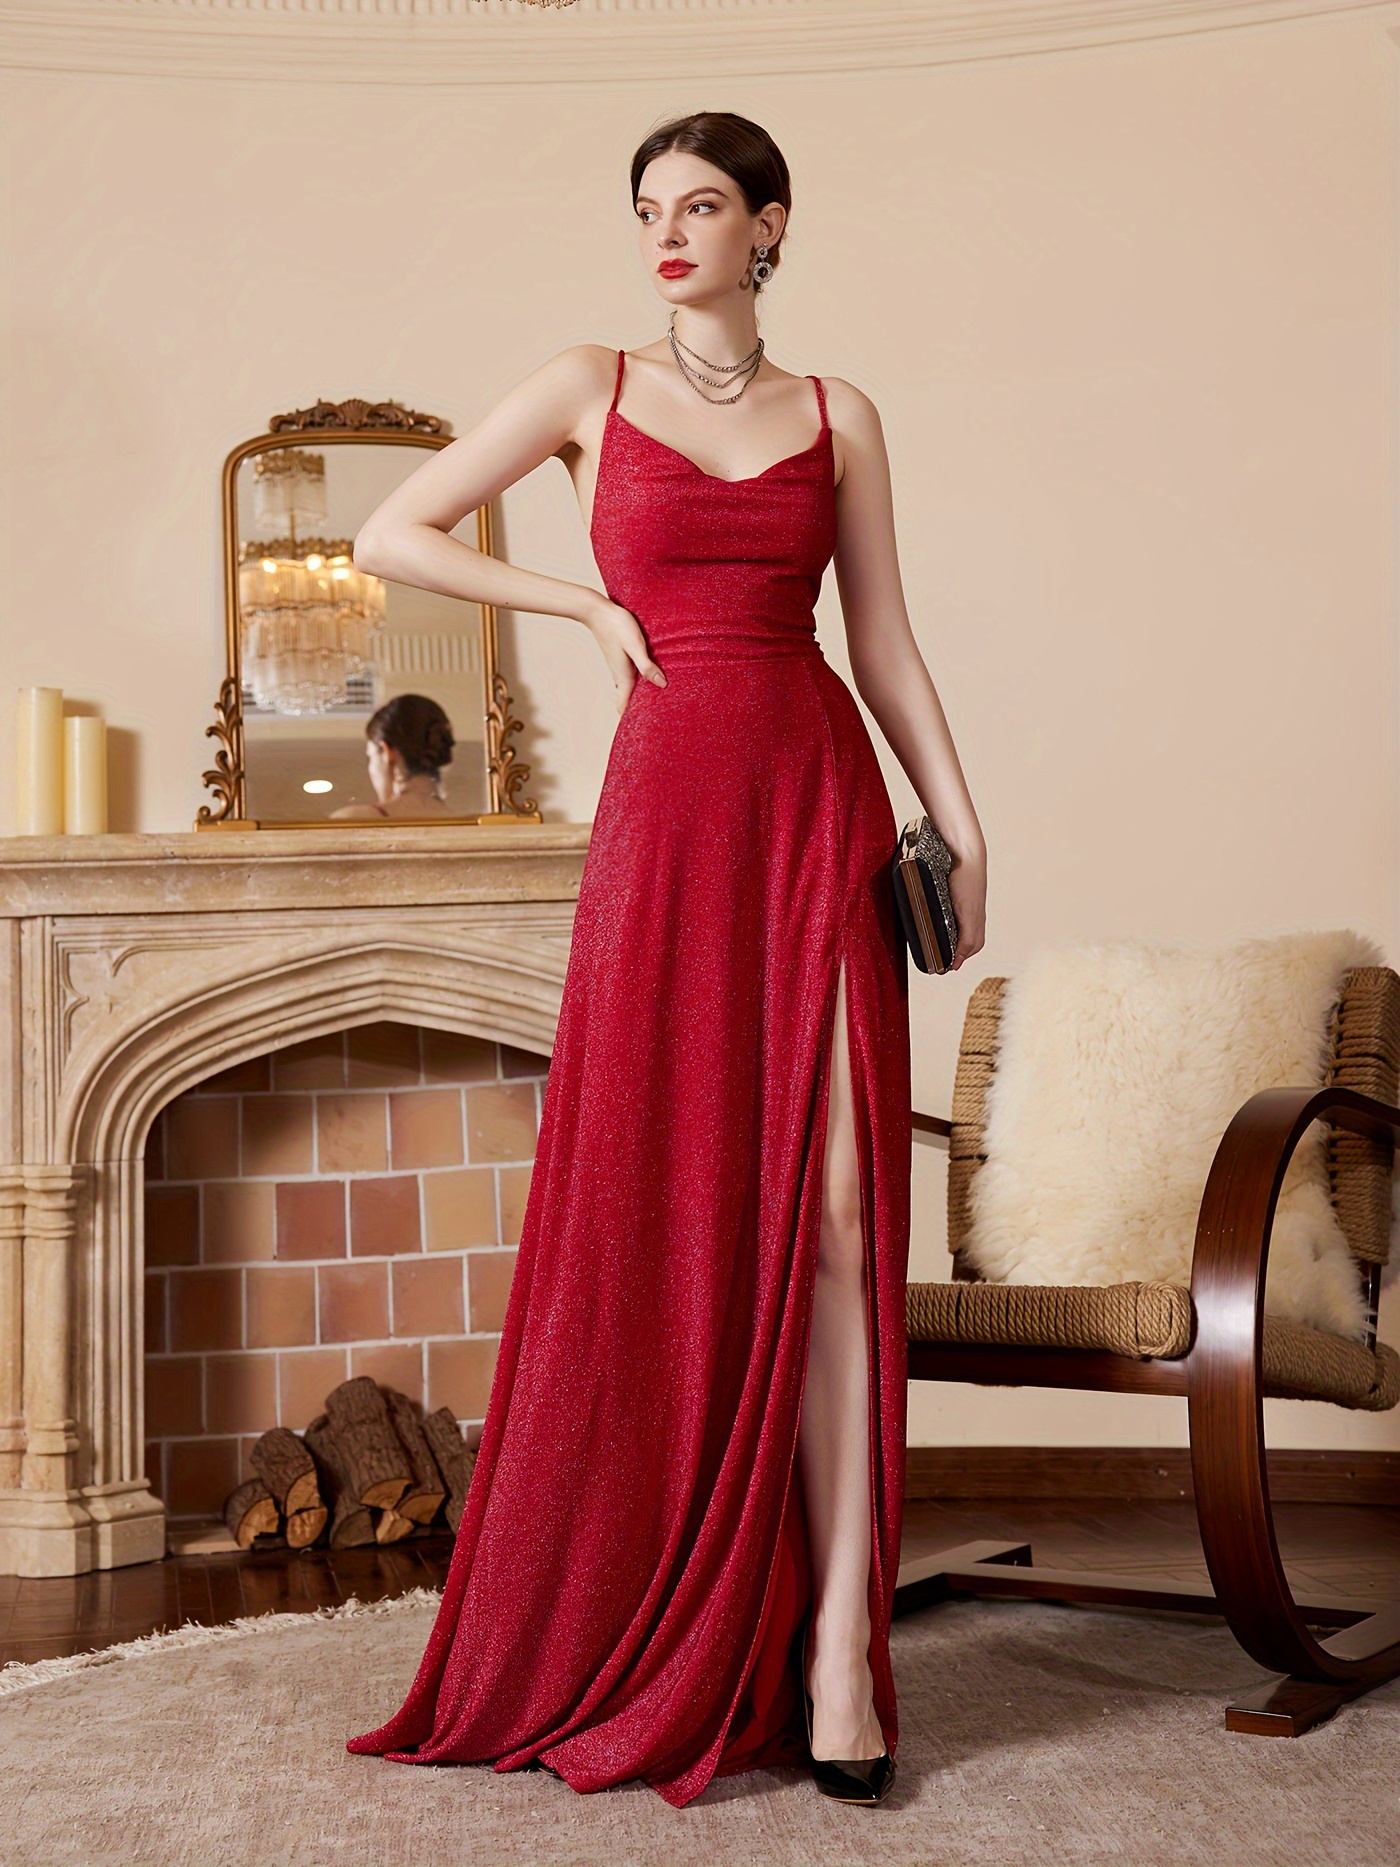 Red Dresses, Red Lace, Satin & Maxi Dresses